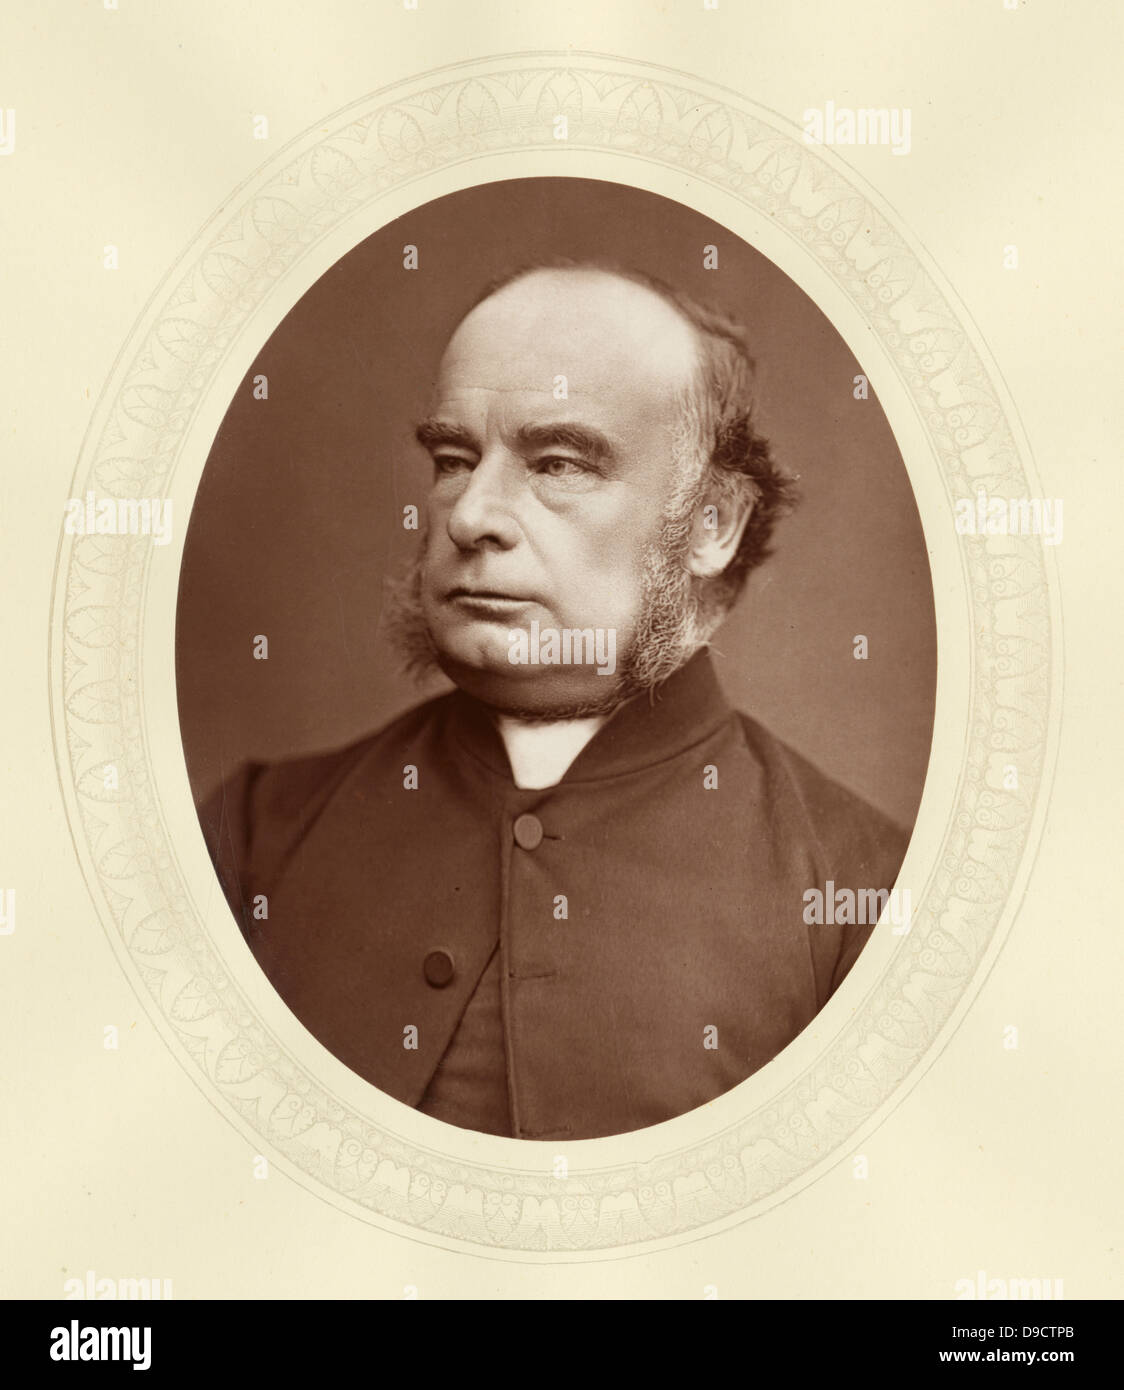 William Connor magee (1821-1891) c1877, Irish-born Anglican churchman, Bishop of Peterborough 1868-1891, Archbishop of York for about four months in 1891. Stock Photo